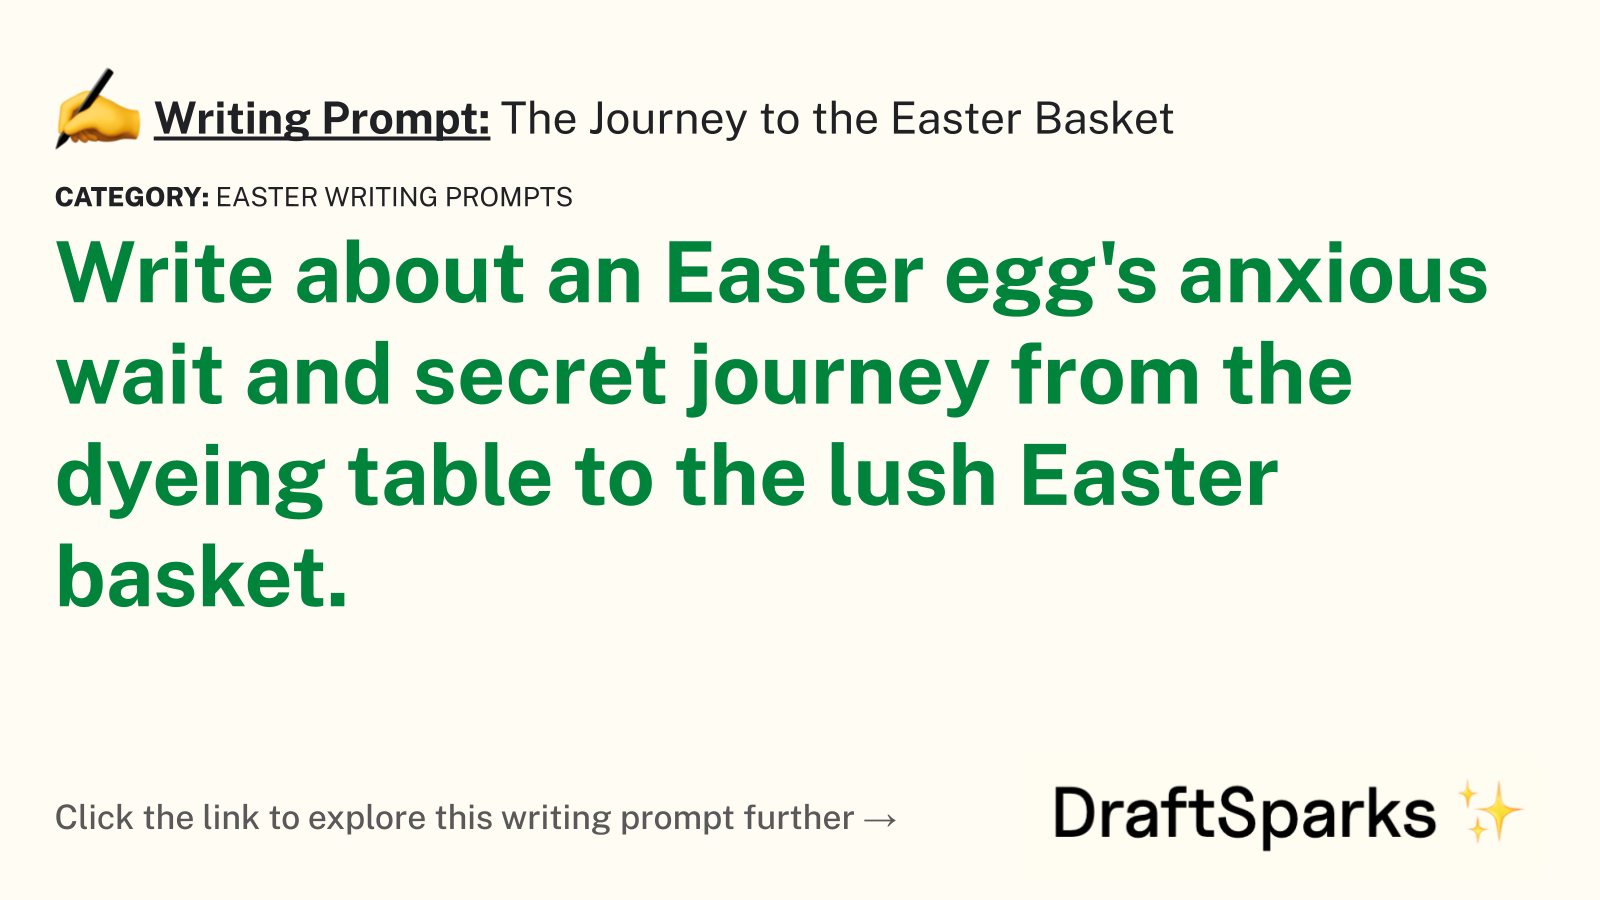 The Journey to the Easter Basket